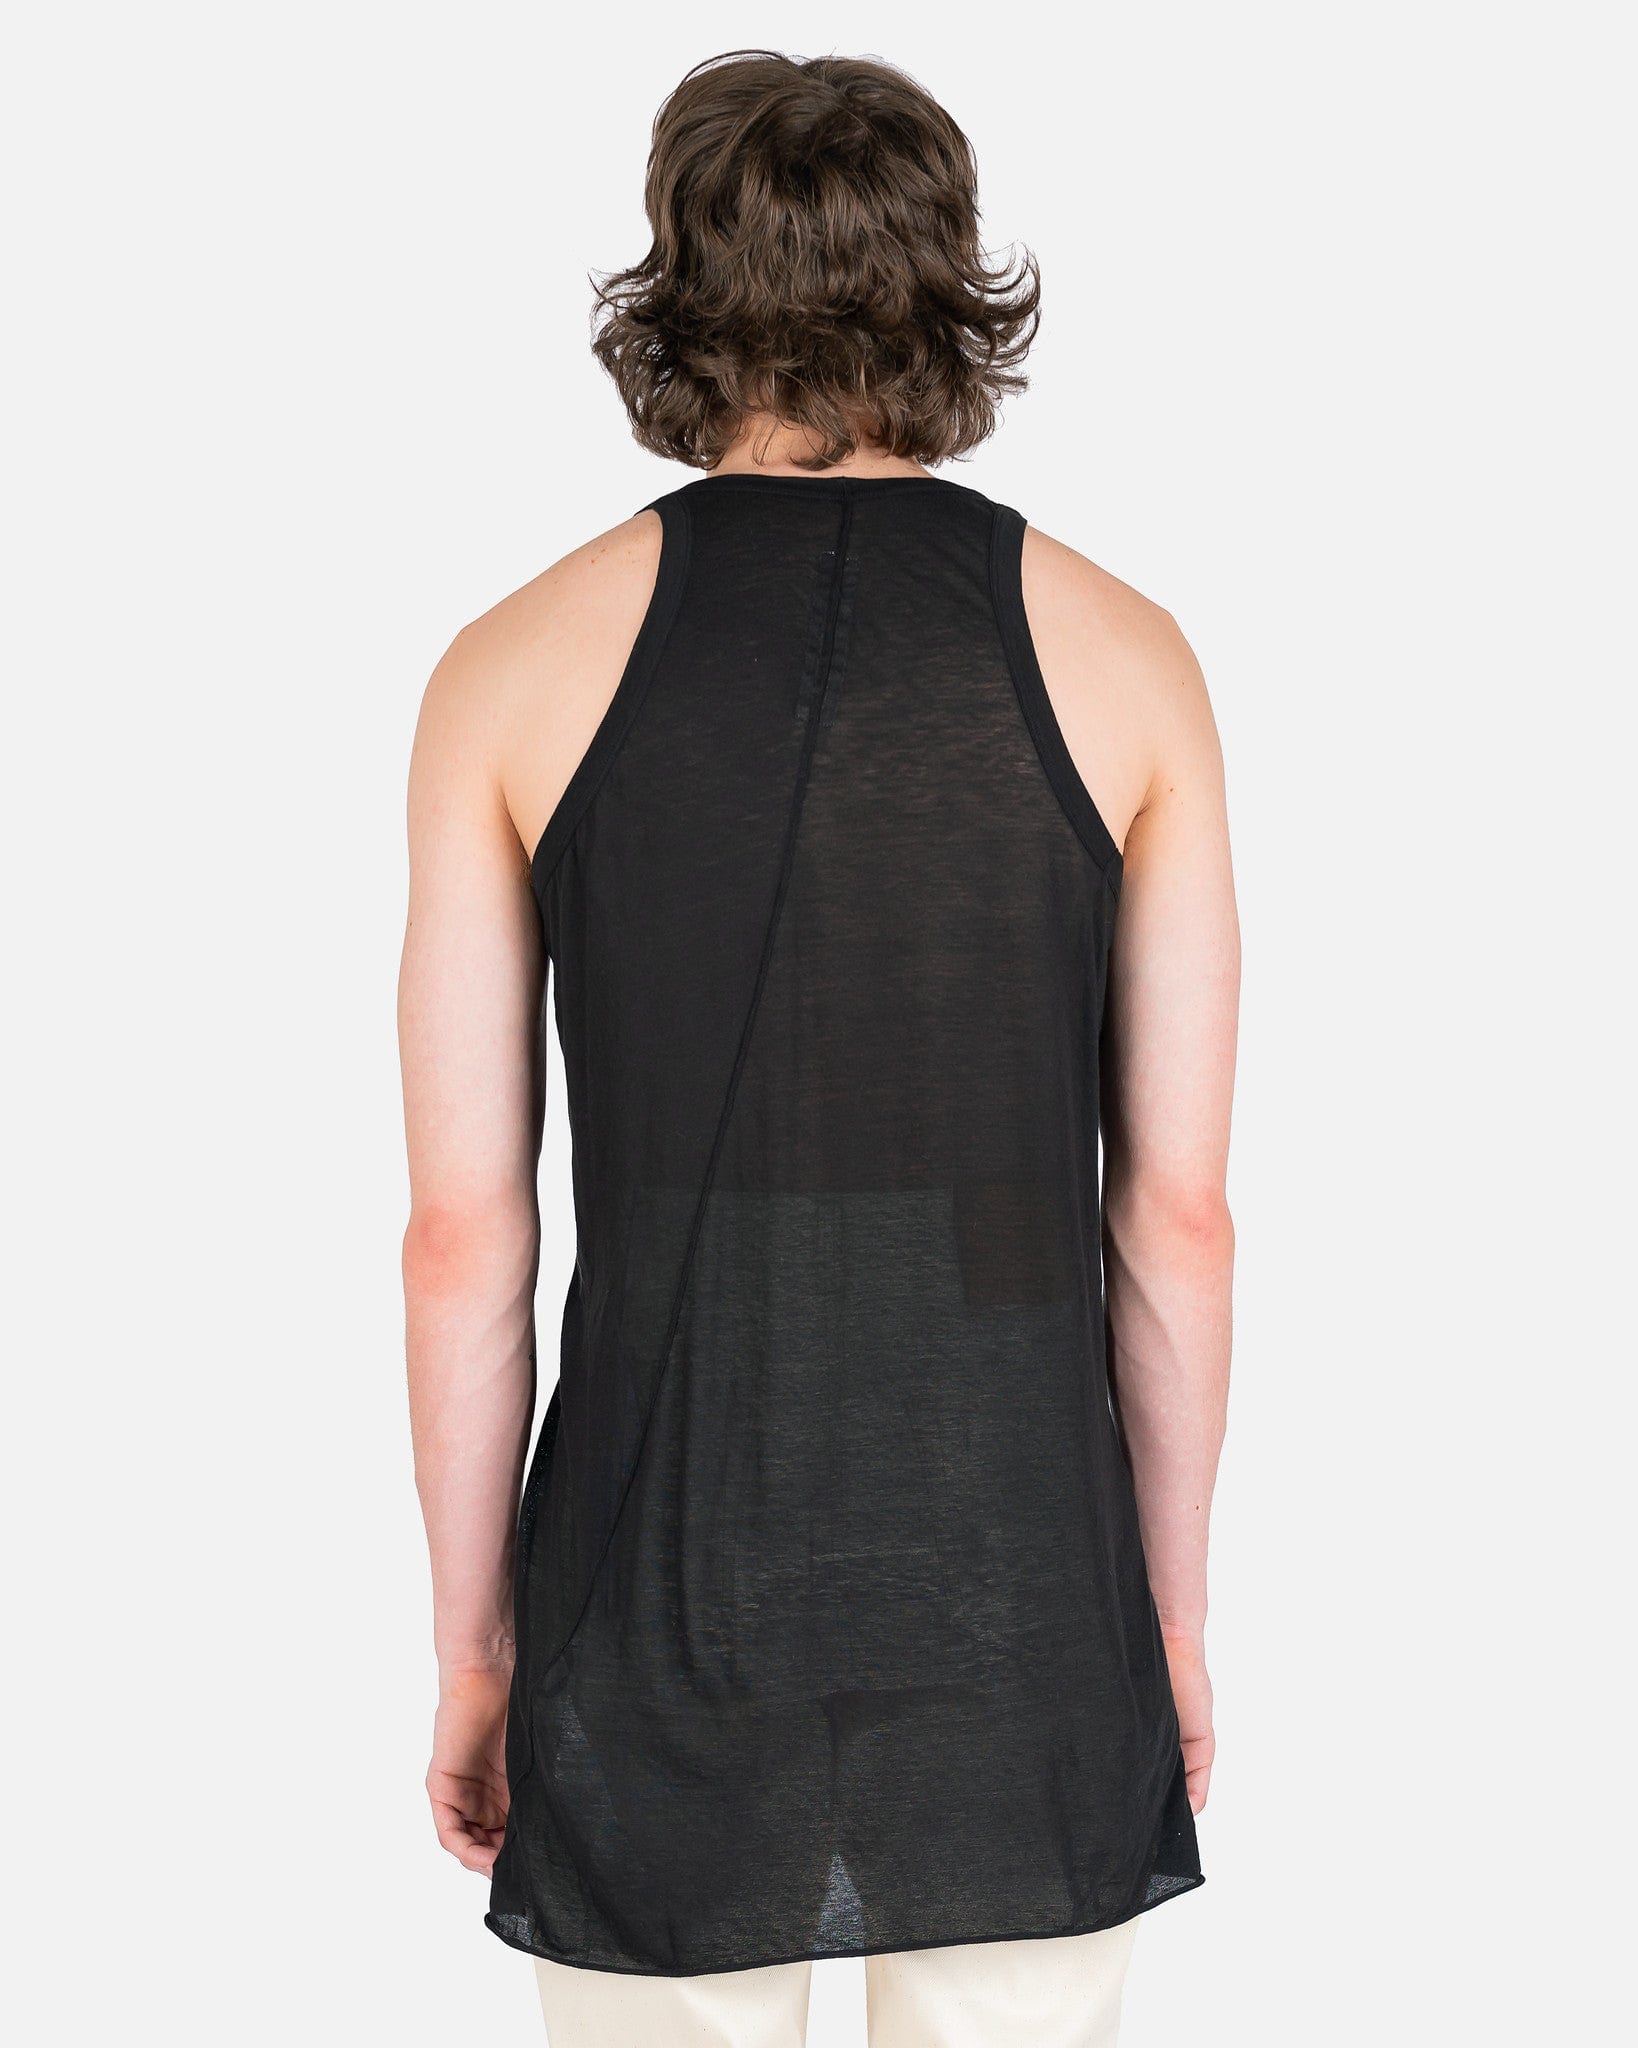 Rick Owens Men's T-Shirts Banded Tank in Black